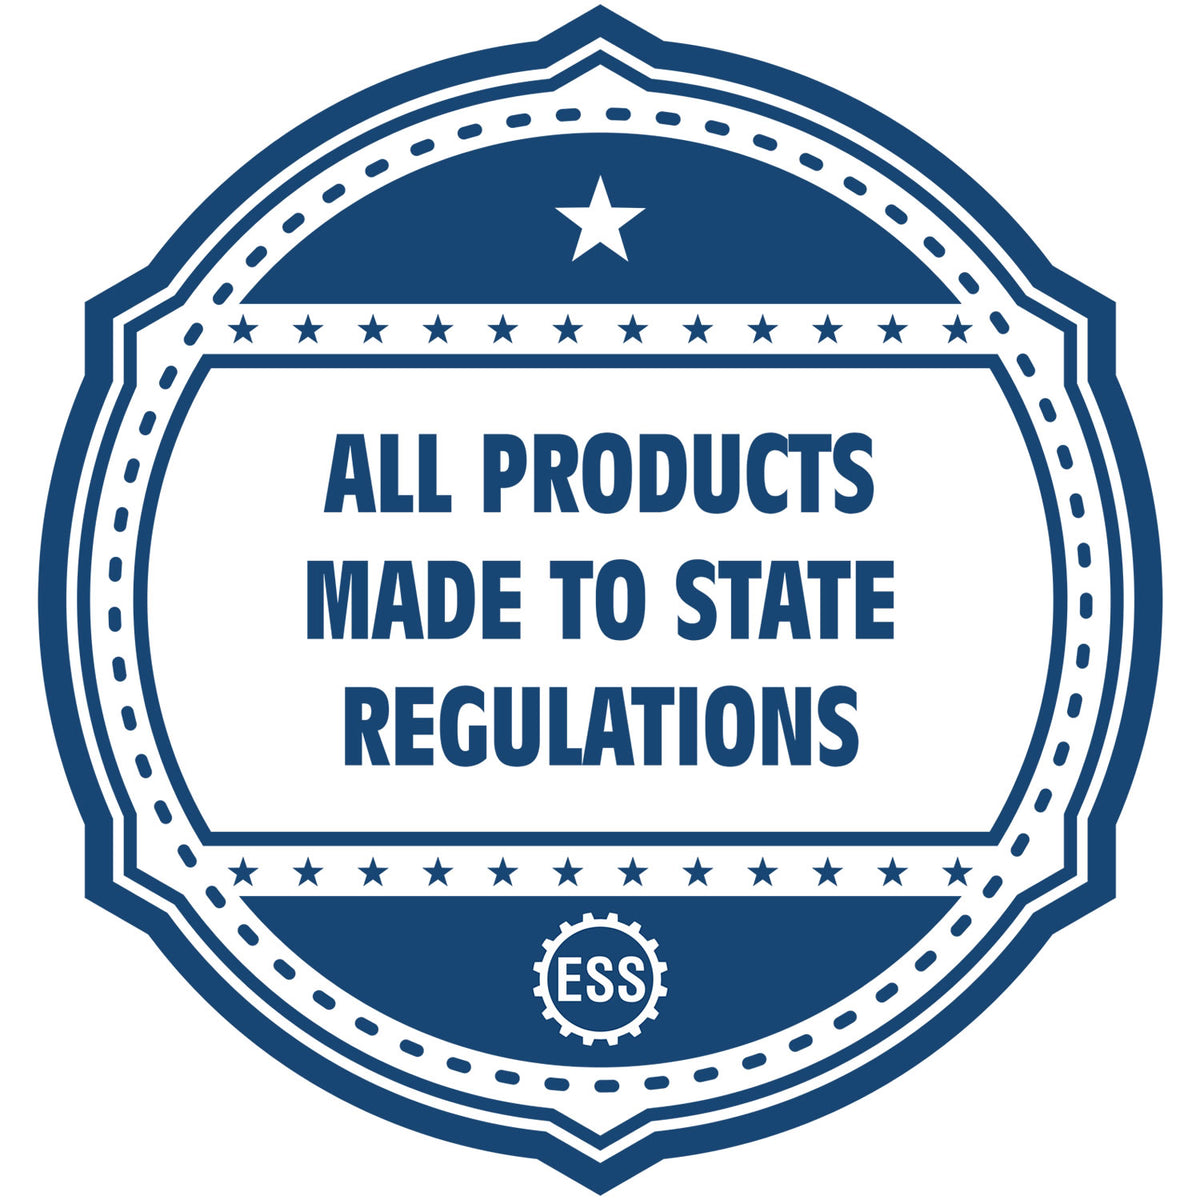 An icon or badge element for the Slim Pre-Inked Wisconsin Architect Seal Stamp showing that this product is made in compliance with state regulations.